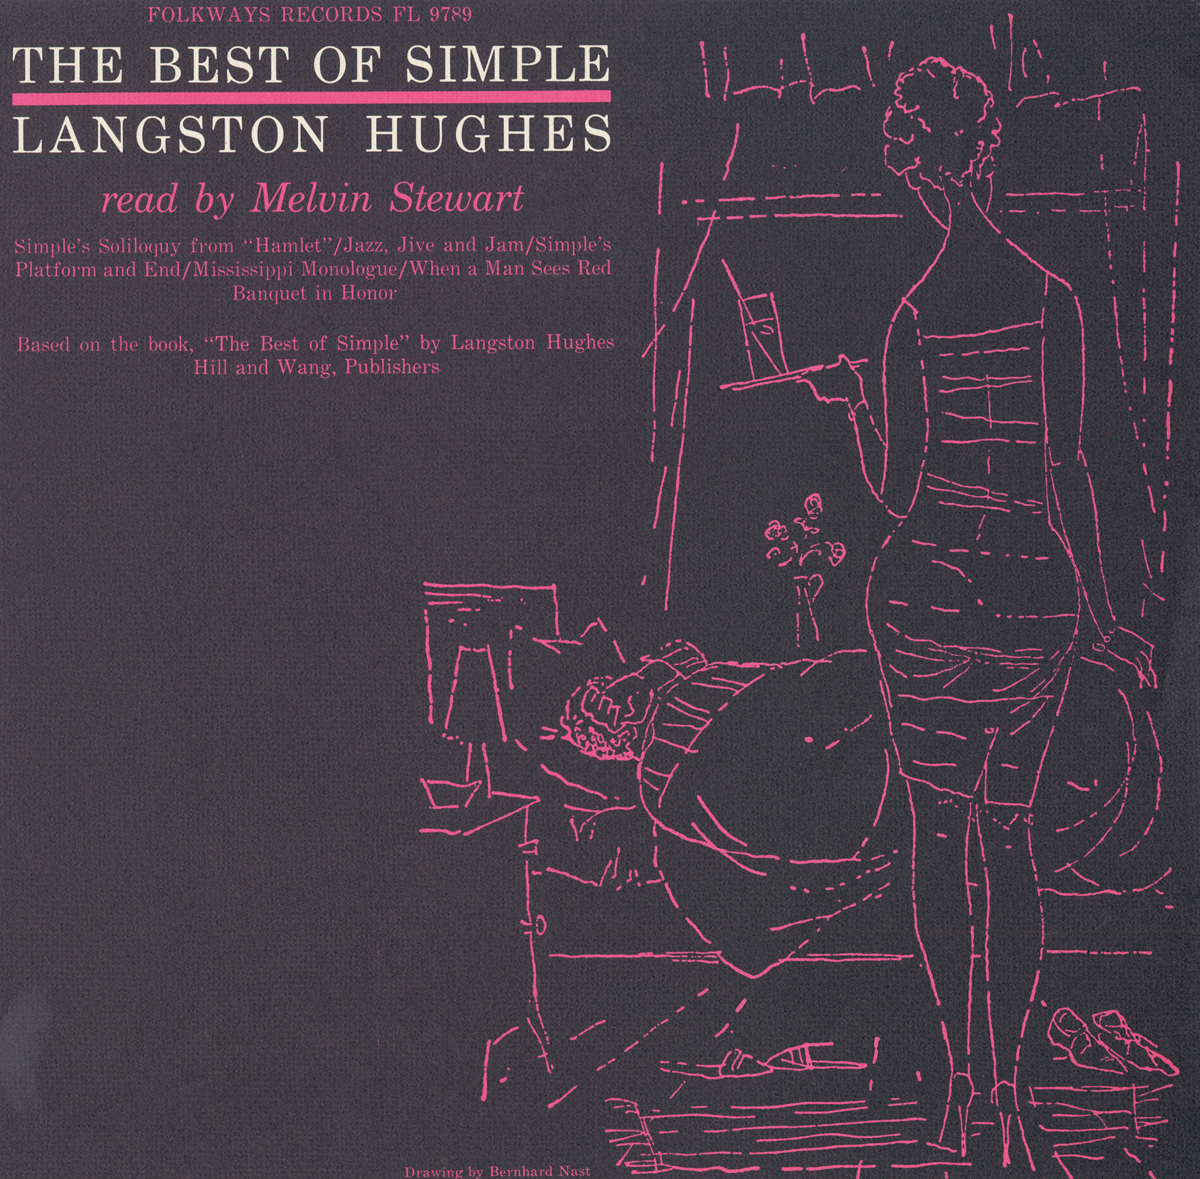 LANGSTON HUGHES' THE BEST OF SIMPLE